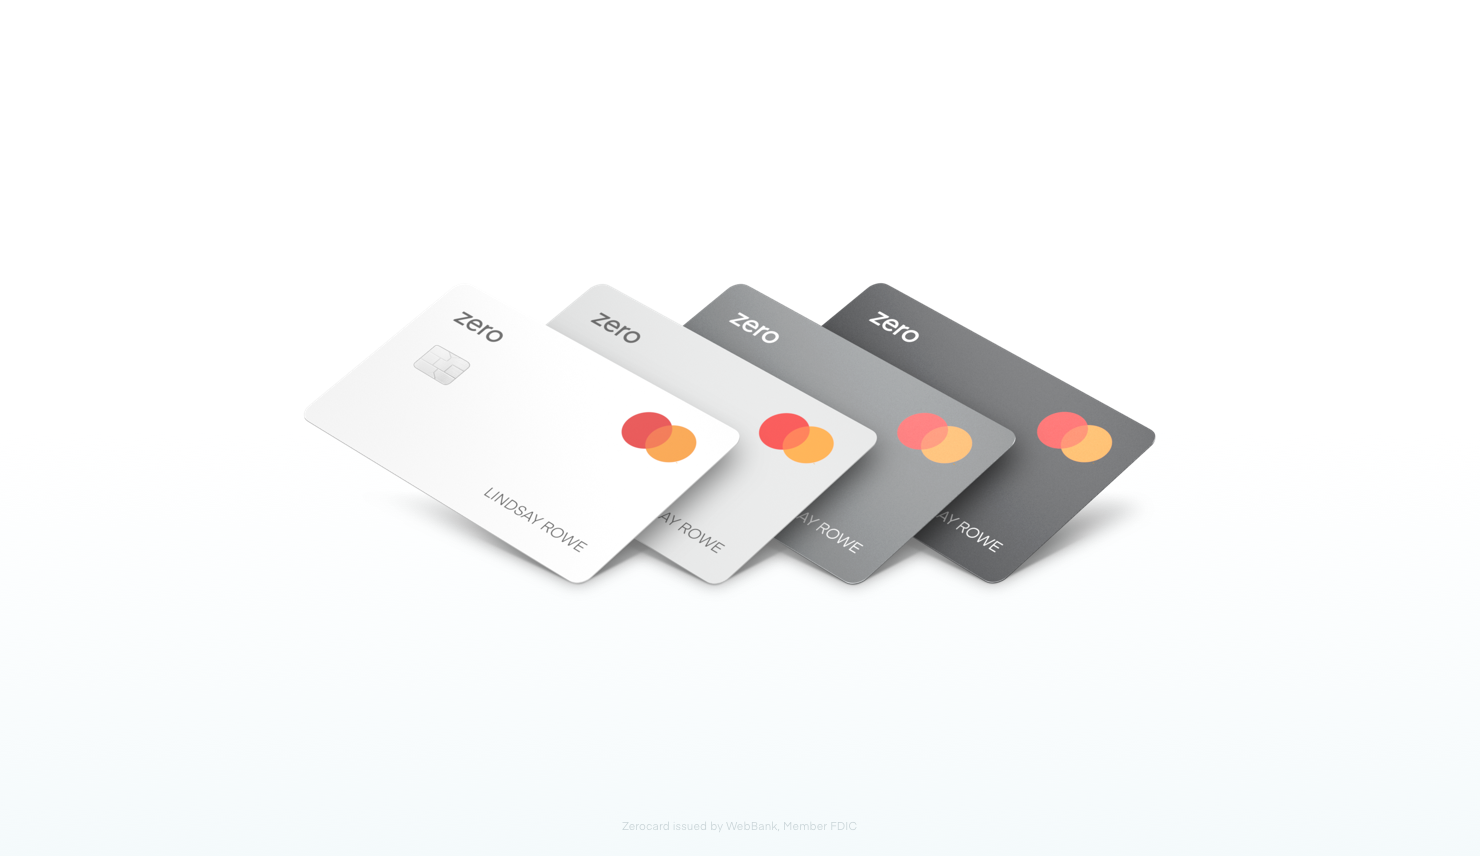 Zero launches publicly with four types of cards and accounts